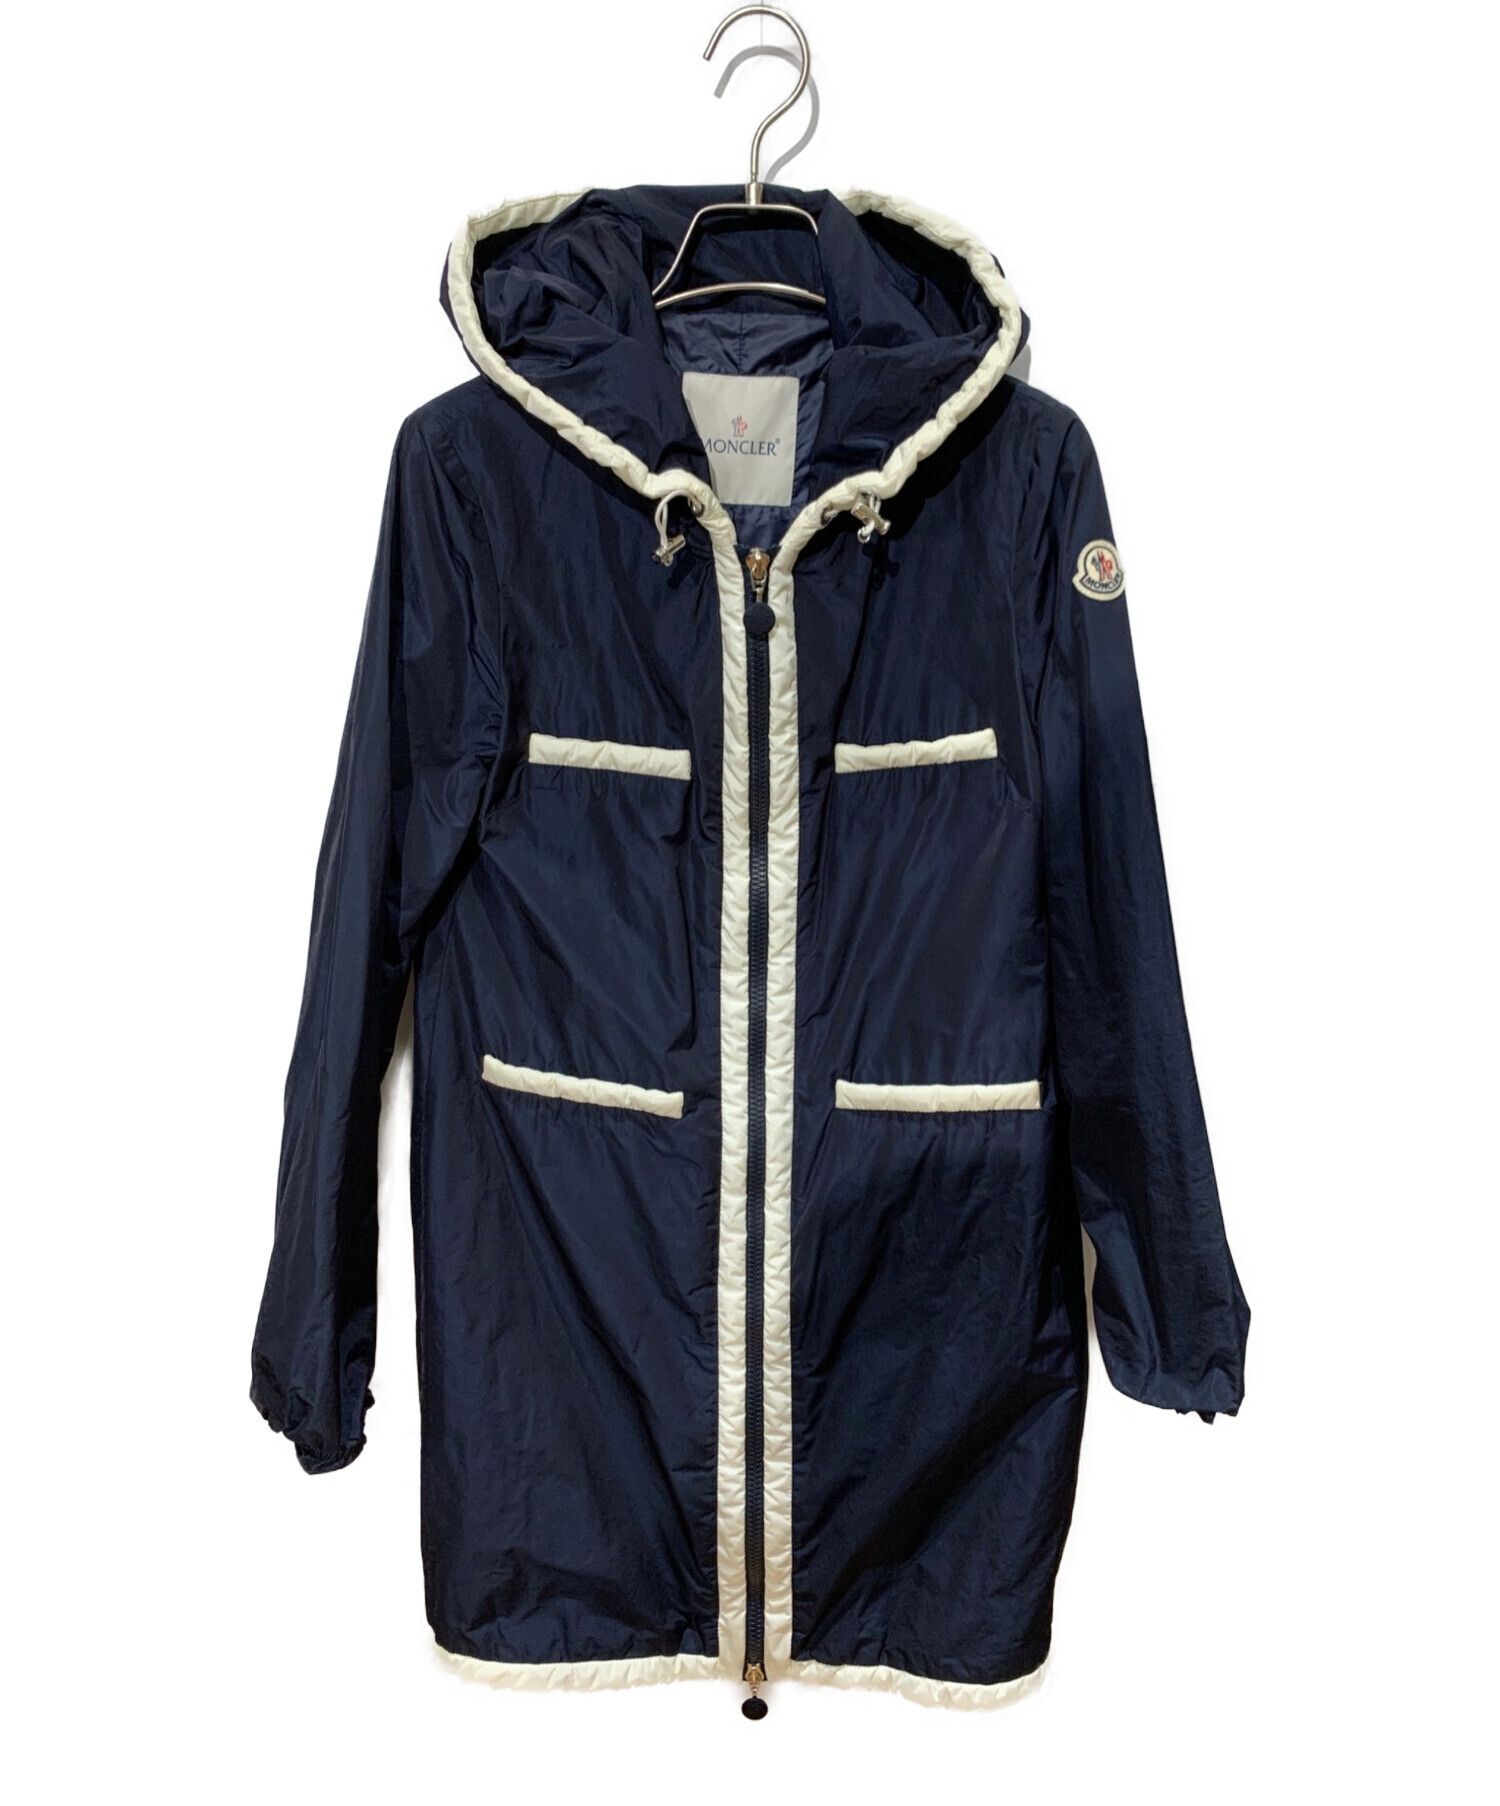 98%OFF!】-MONCLER - モンクレール ナイロンパ•ーカー♡ レ•ア - lab